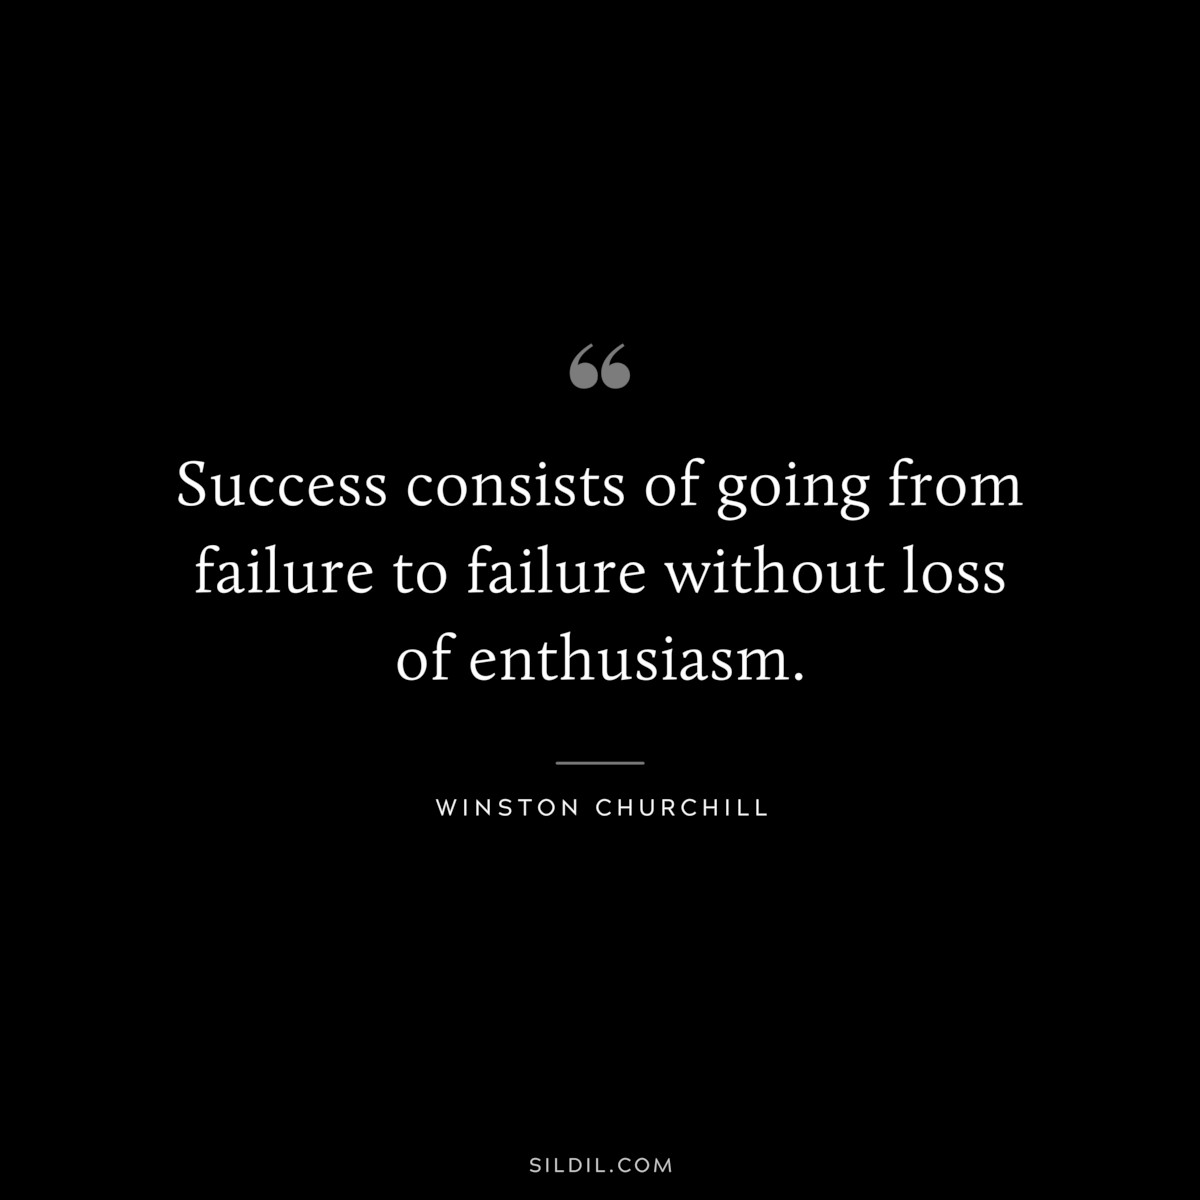 Success consists of going from failure to failure without loss of enthusiasm. ― Winston Churchill